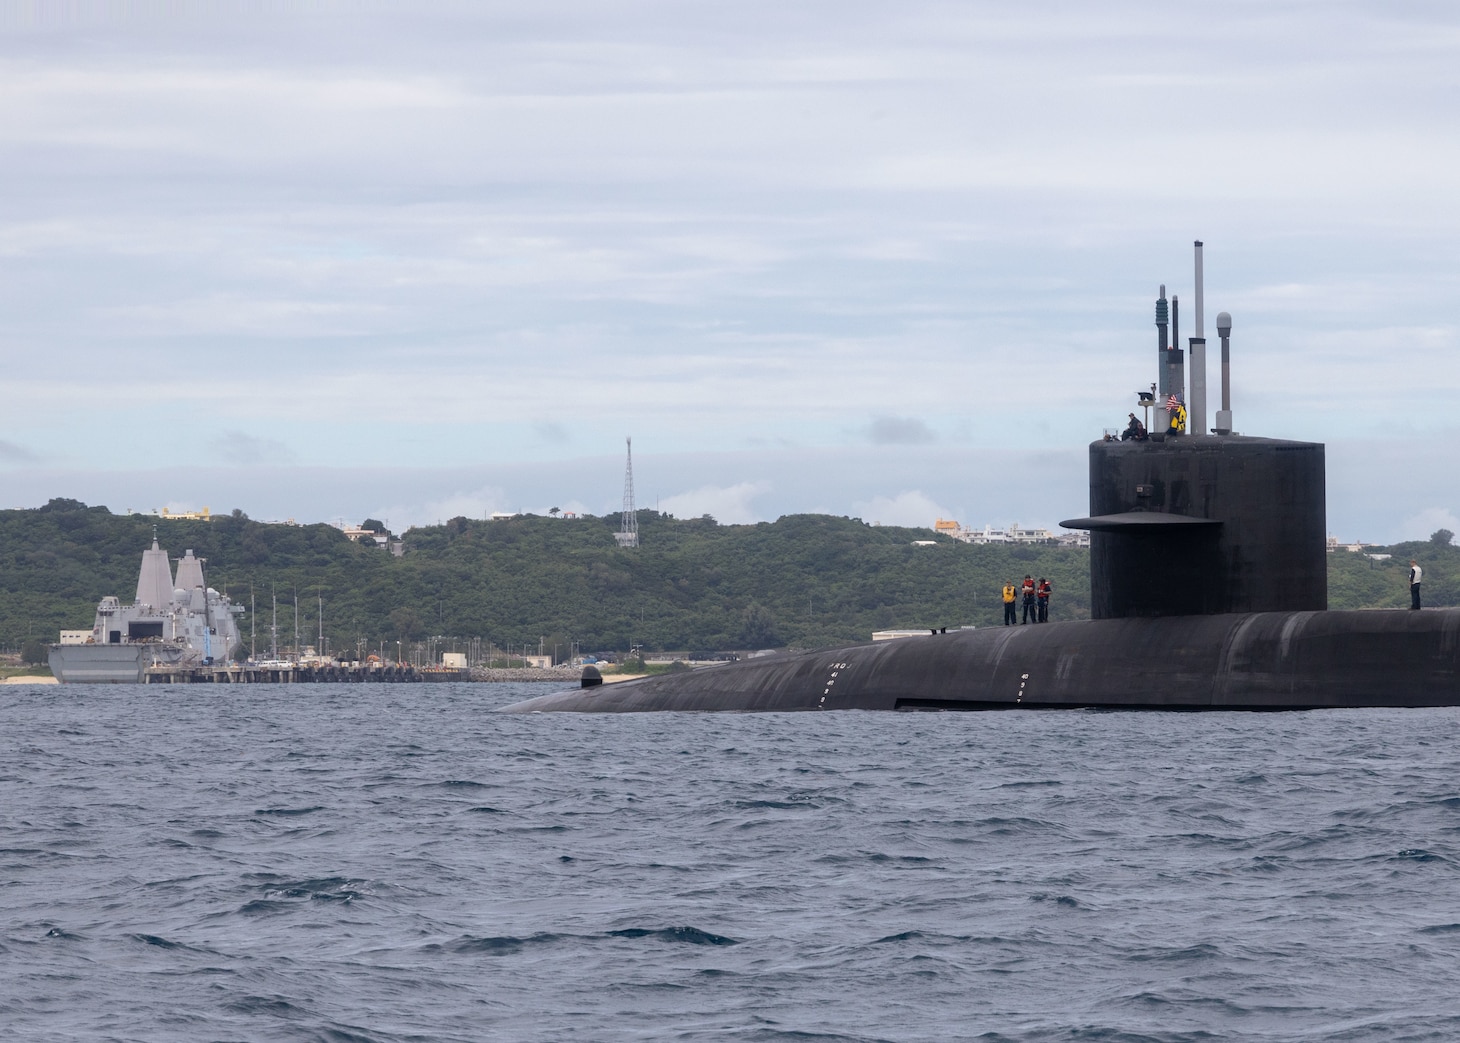 OKINAWA, Japan (Nov. 10, 2022) The Ohio-class guided-missile submarine USS Michigan (SSGN 727) made a brief stop for personnel near Okinawa, Japan as part of its deployment to the U.S. 7th Fleet area of operations, Nov. 10. Michigan is homeported at Naval Base Kitsap, Washington and is operating in the U.S. 7th Fleet area of operations, conducting maritime security operations and supporting national security interests. (U.S. Marine Corps photo by Staff Sgt. Andrew Ochoa)